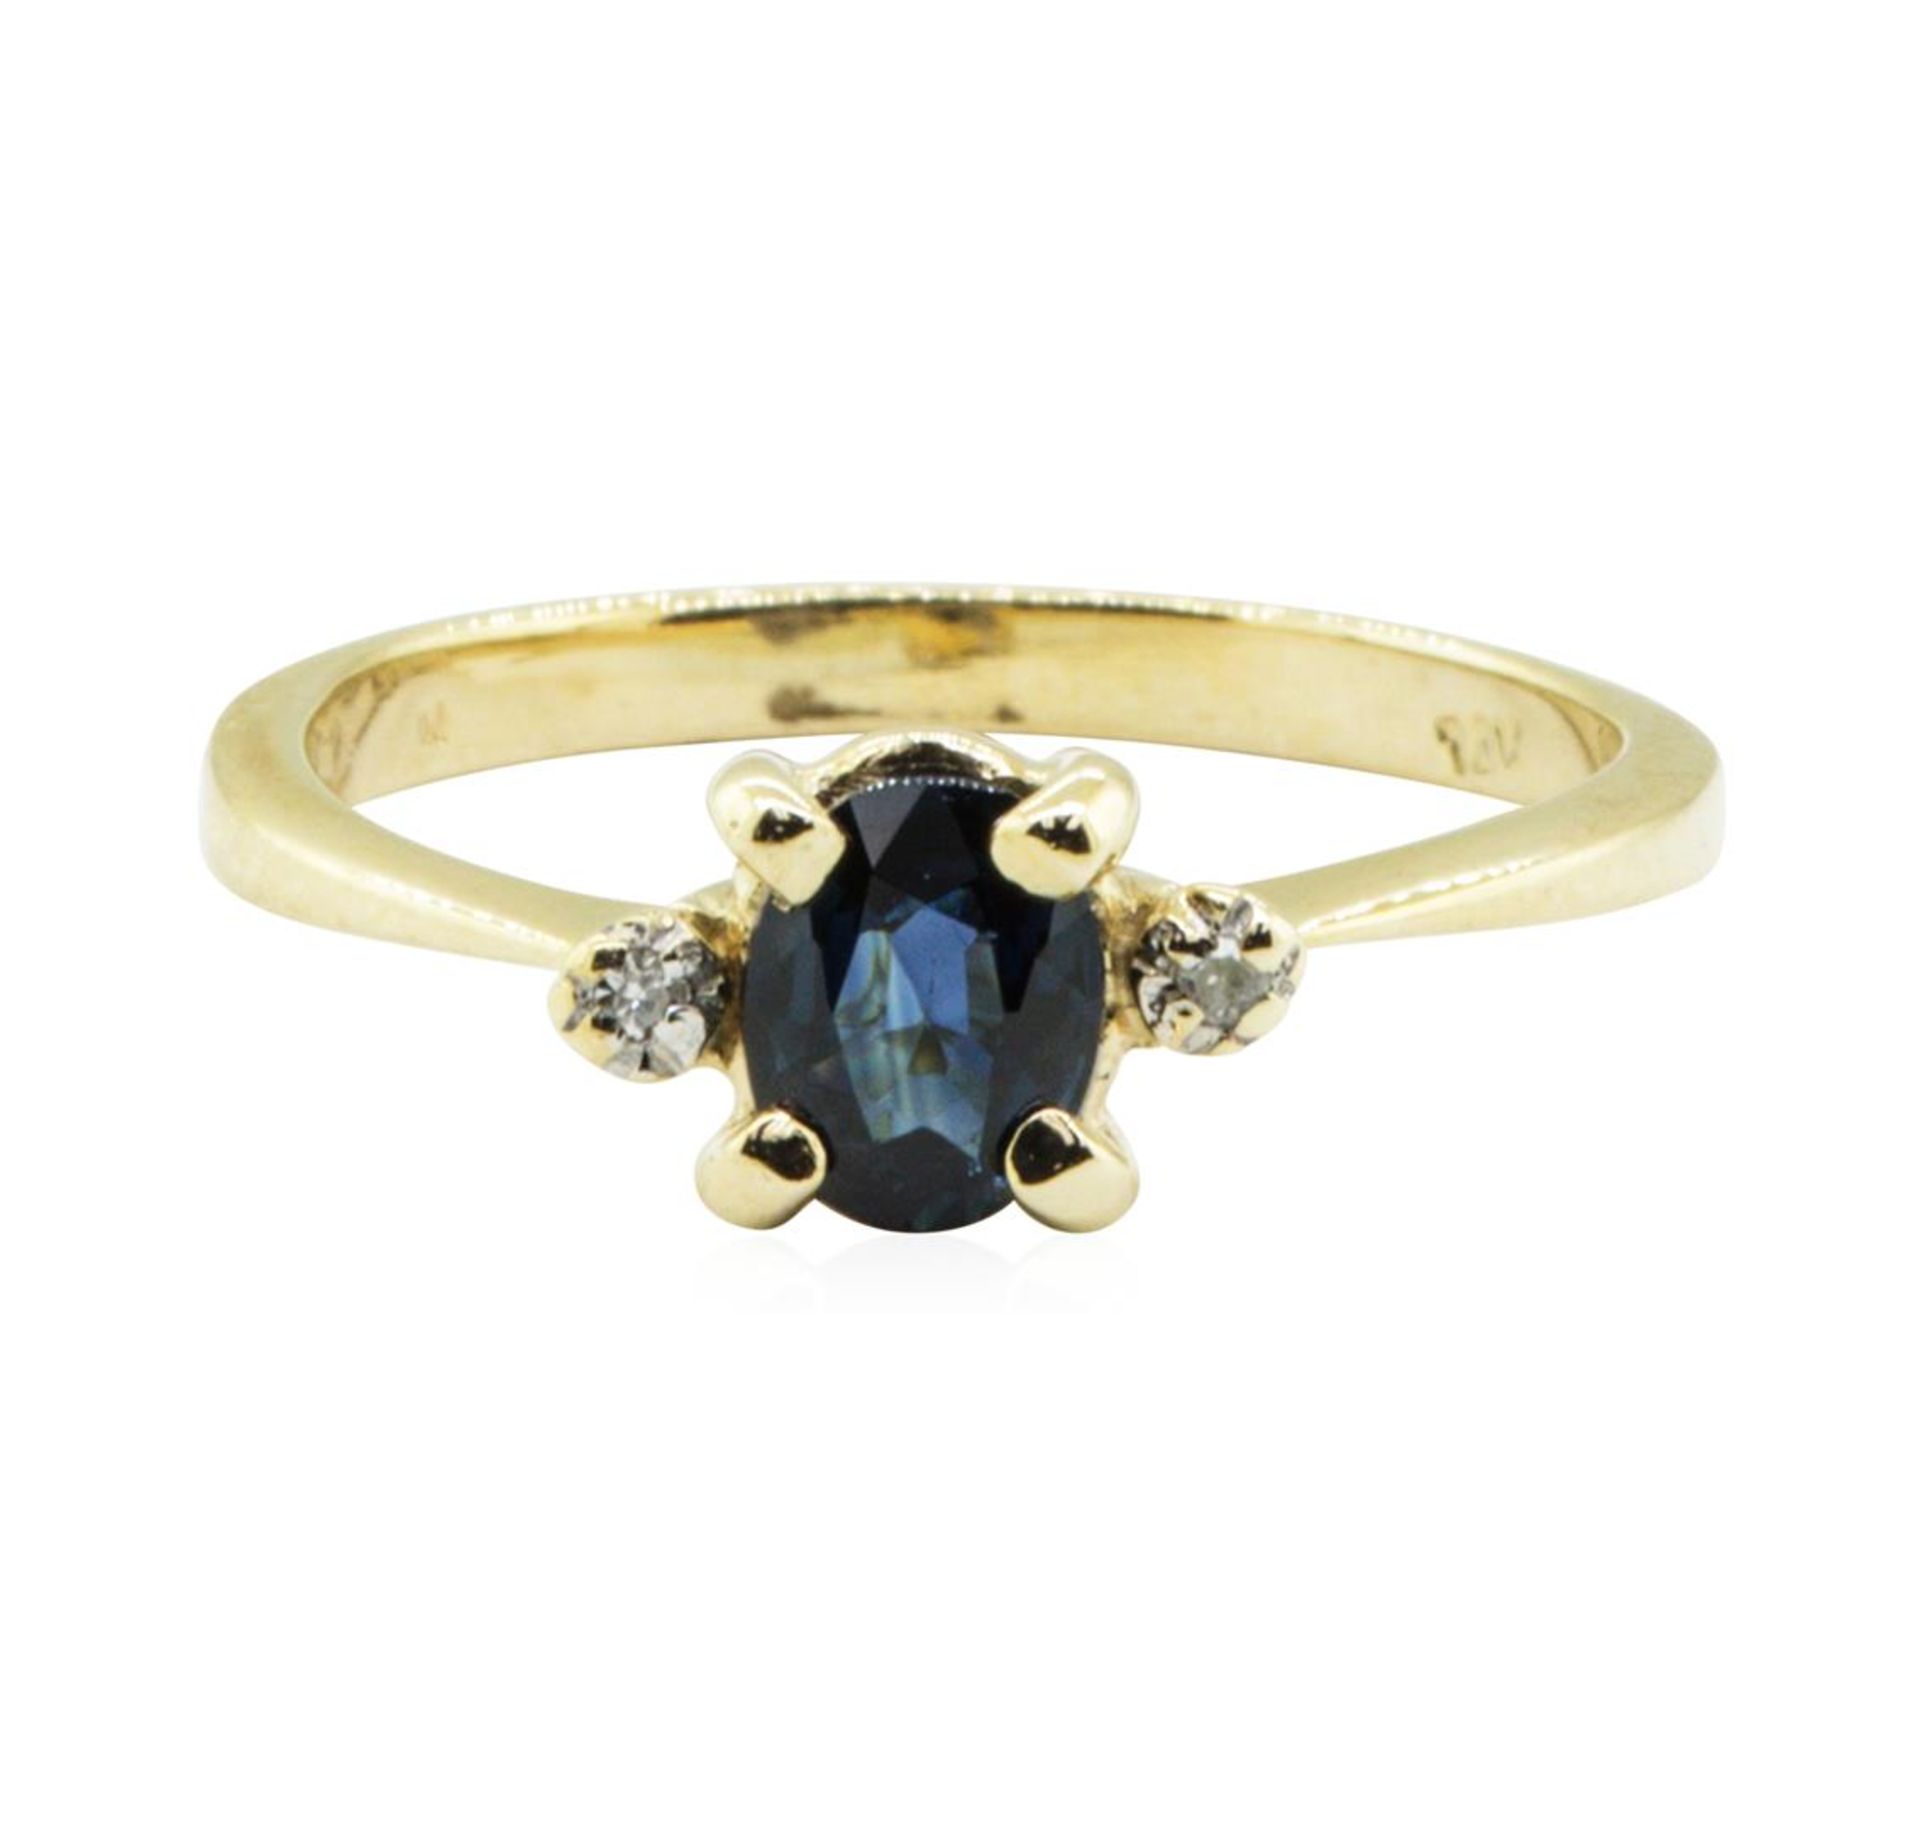 0.69 ctw Blue Sapphire and Diamond Ring - 14KT Yellow Gold - Image 2 of 4